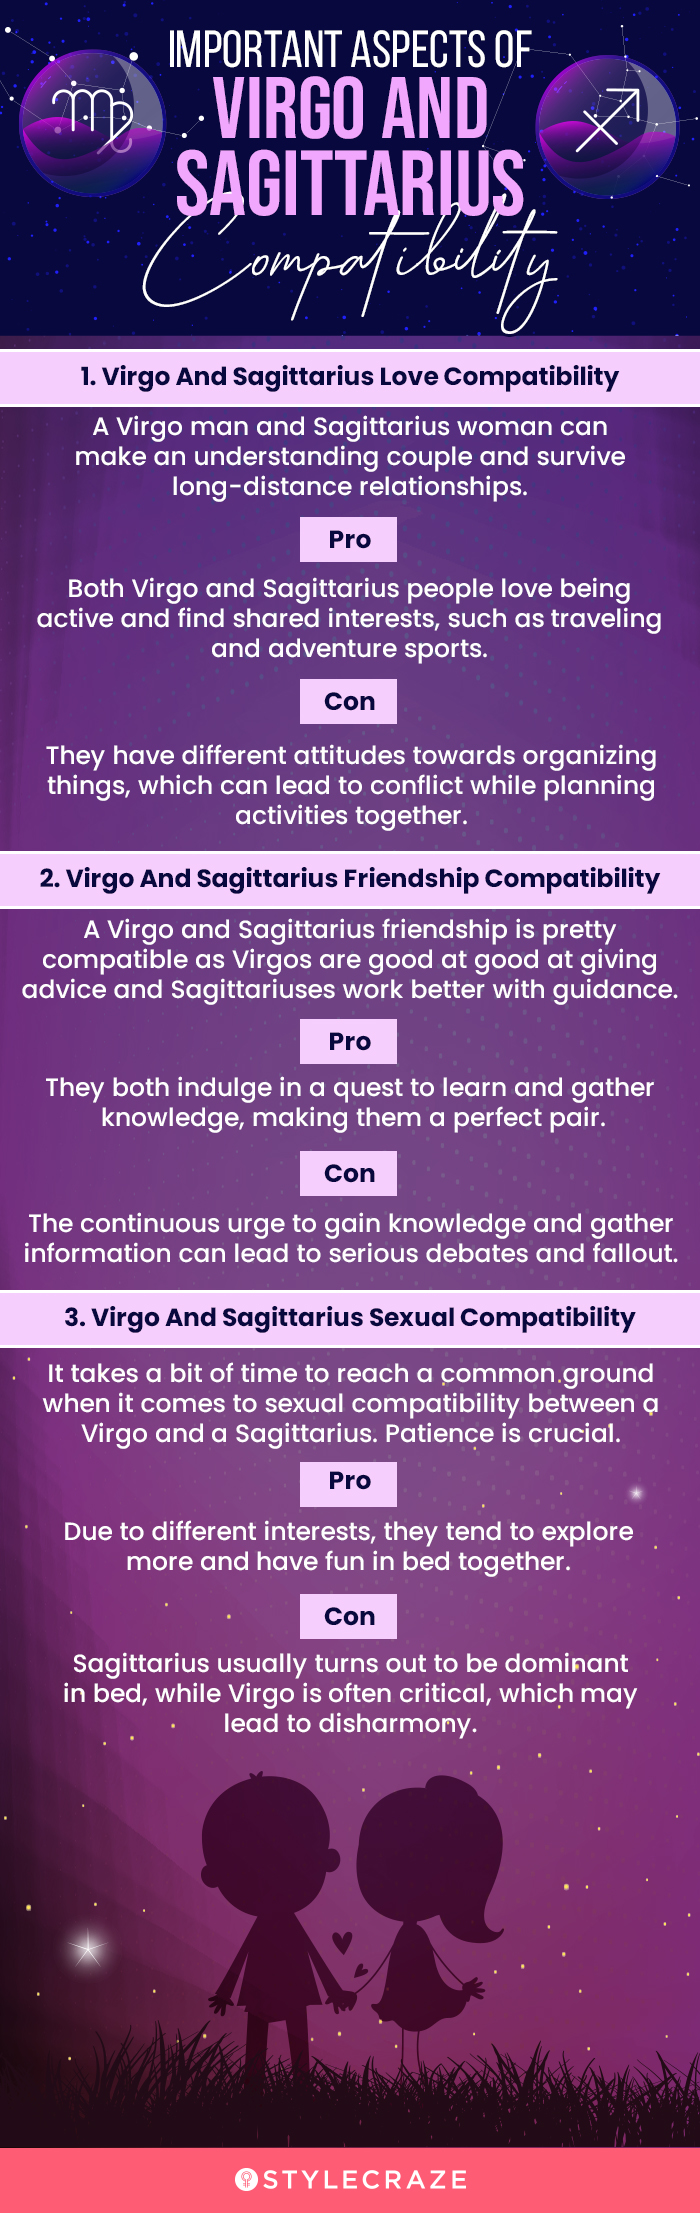 important aspects of virgo and sagittarius compatibility (infographic)